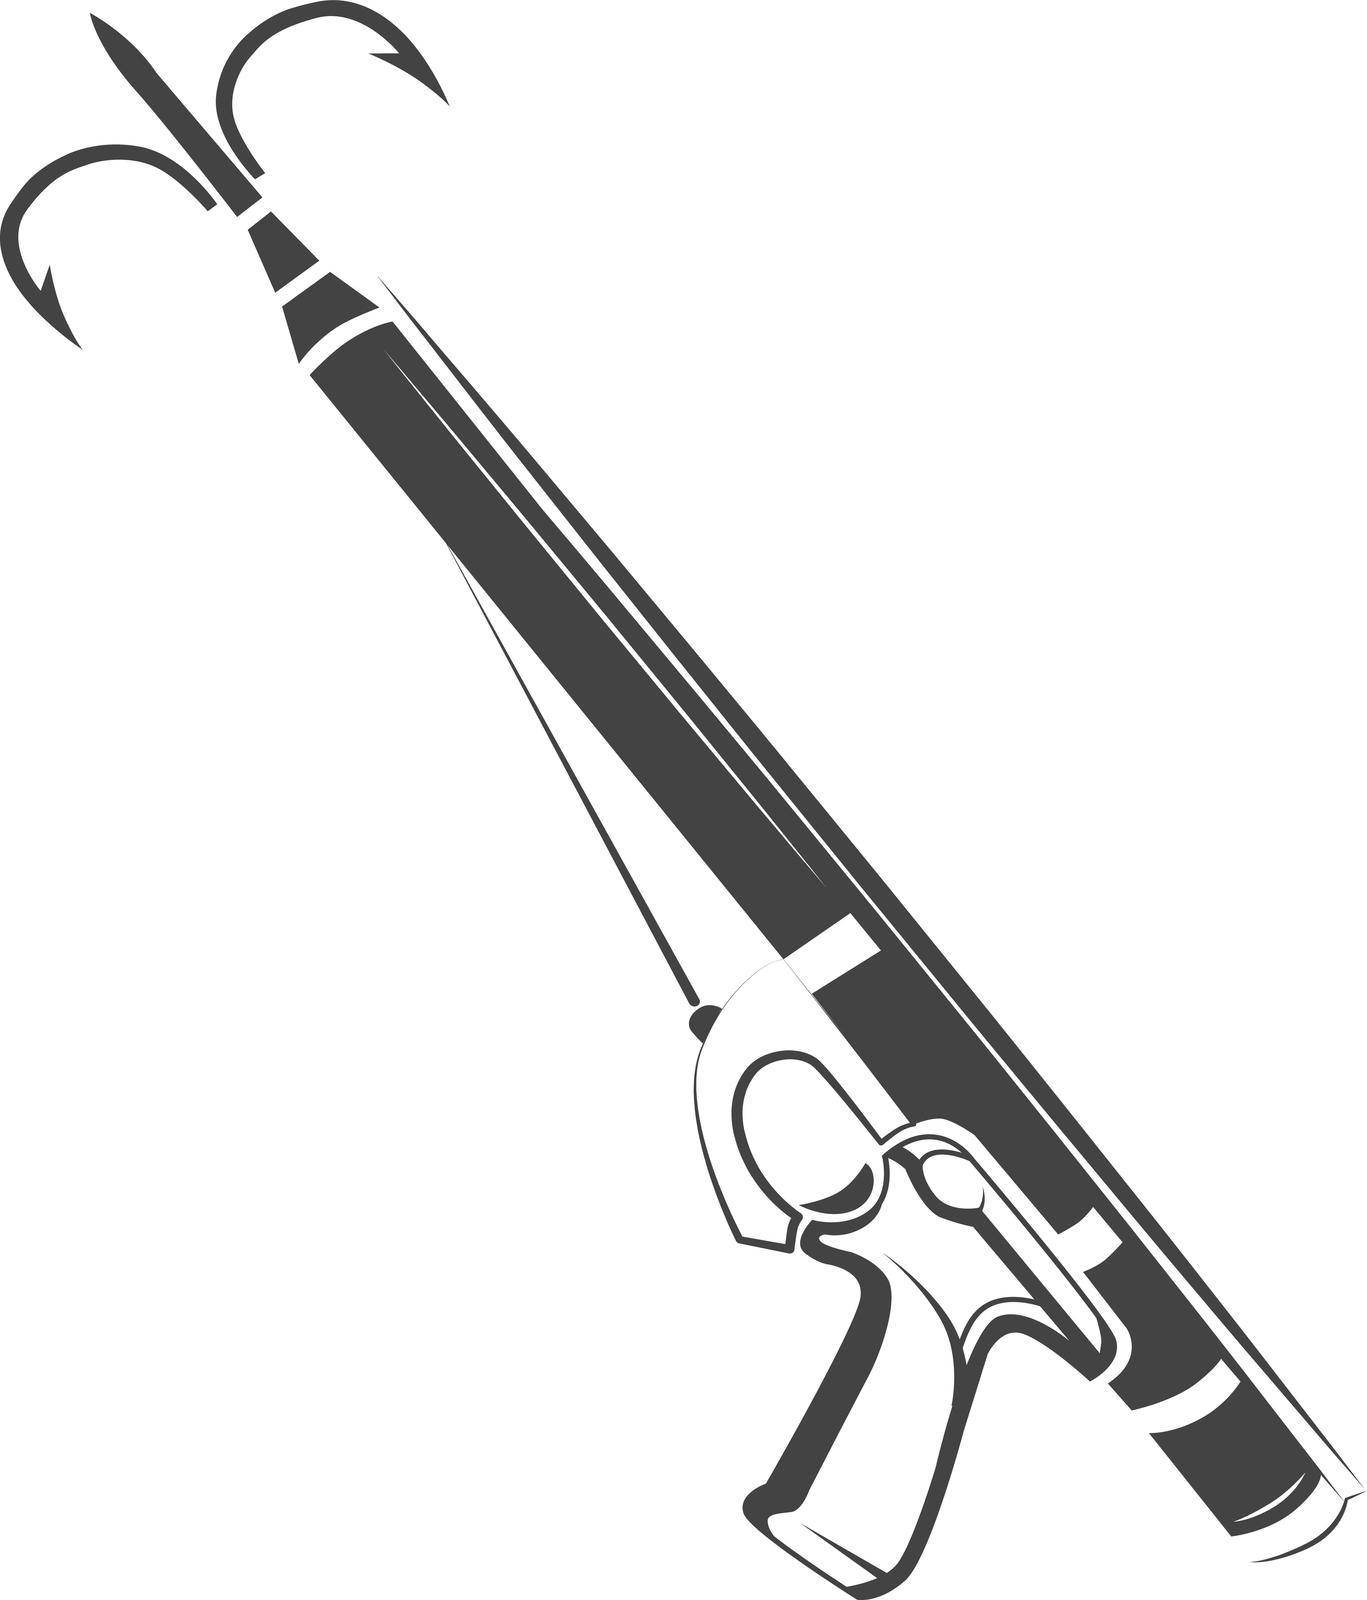 Harpoon gun icon. Whale and fish hunt weapon by MicroOne